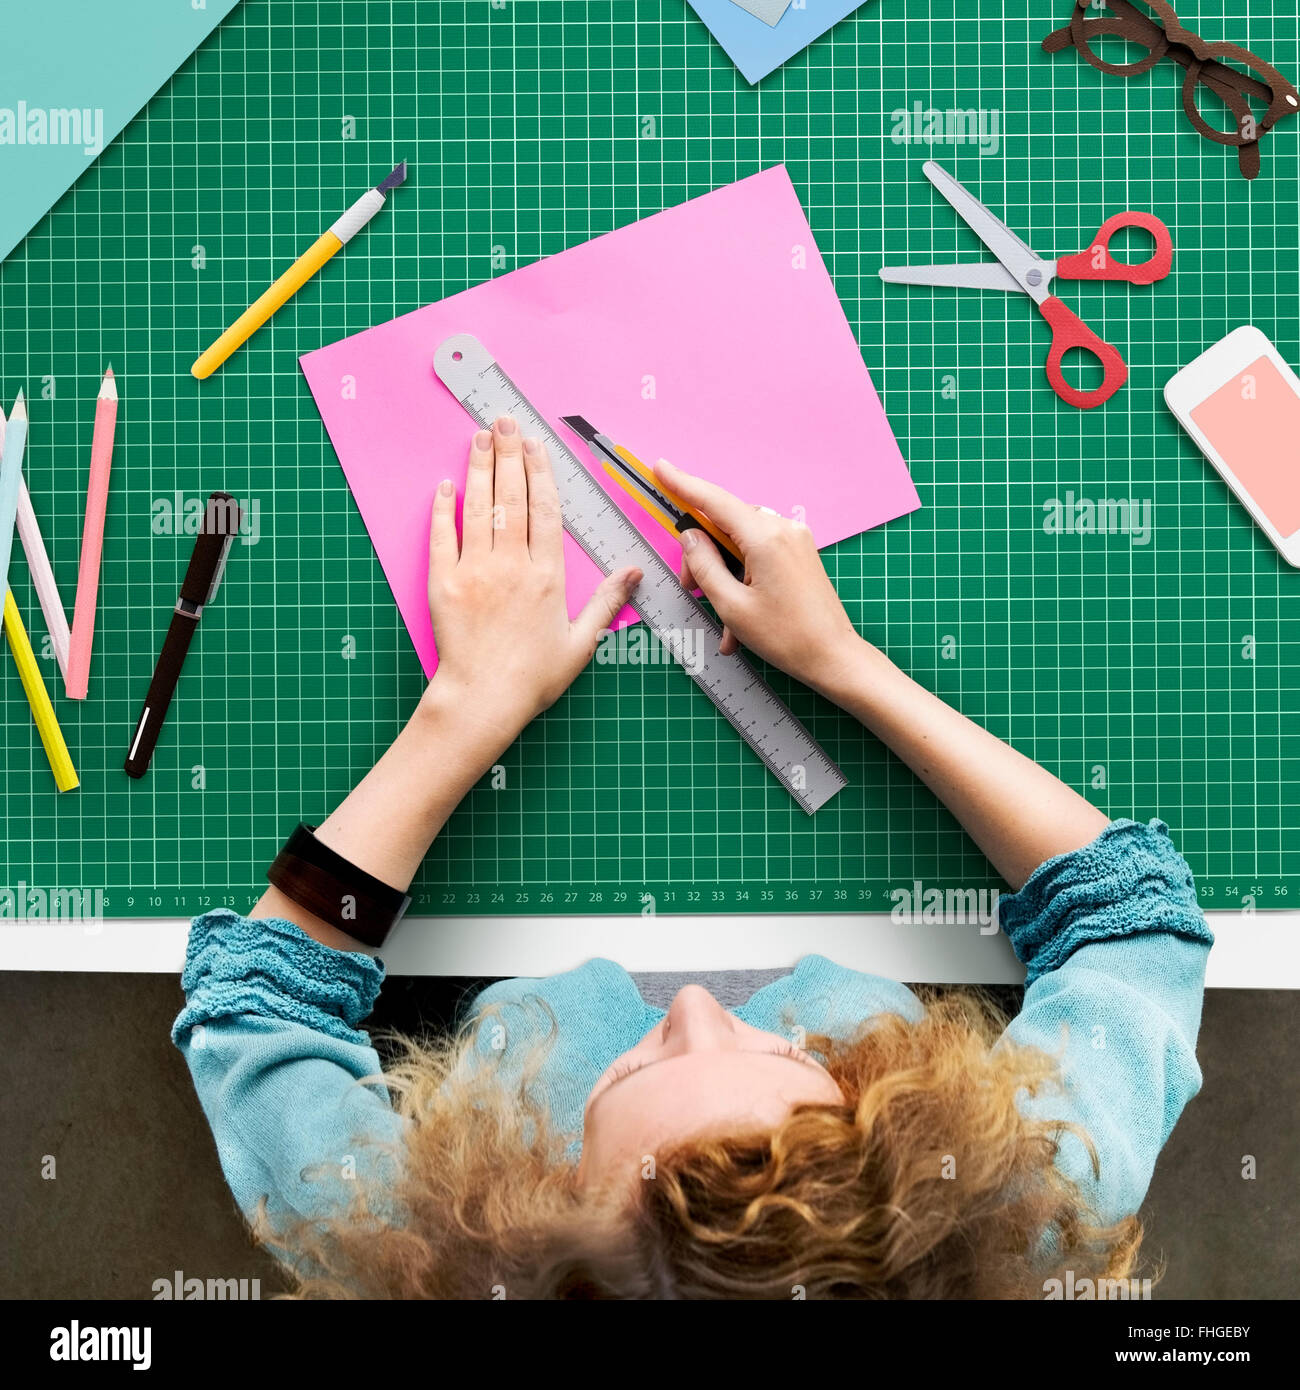 Woman Cutting Paper Stationery Workstation Concept Stock Photo